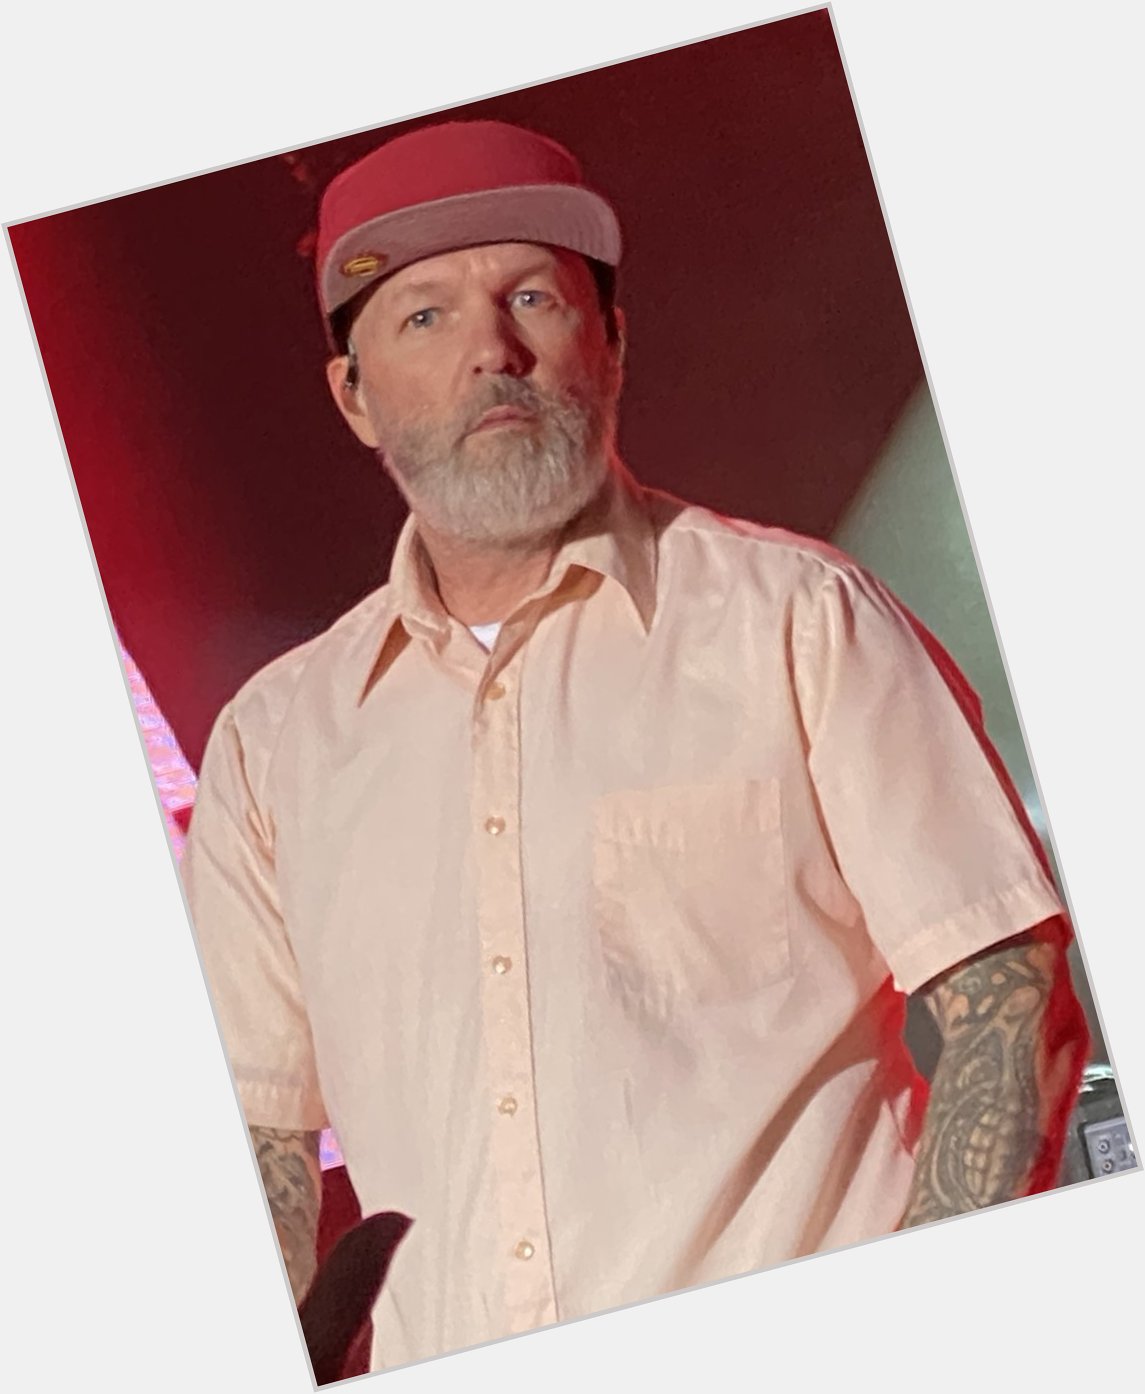 Happy Birthday to Fred Durst of Limp Bizkit 
(August 20, 1970). 